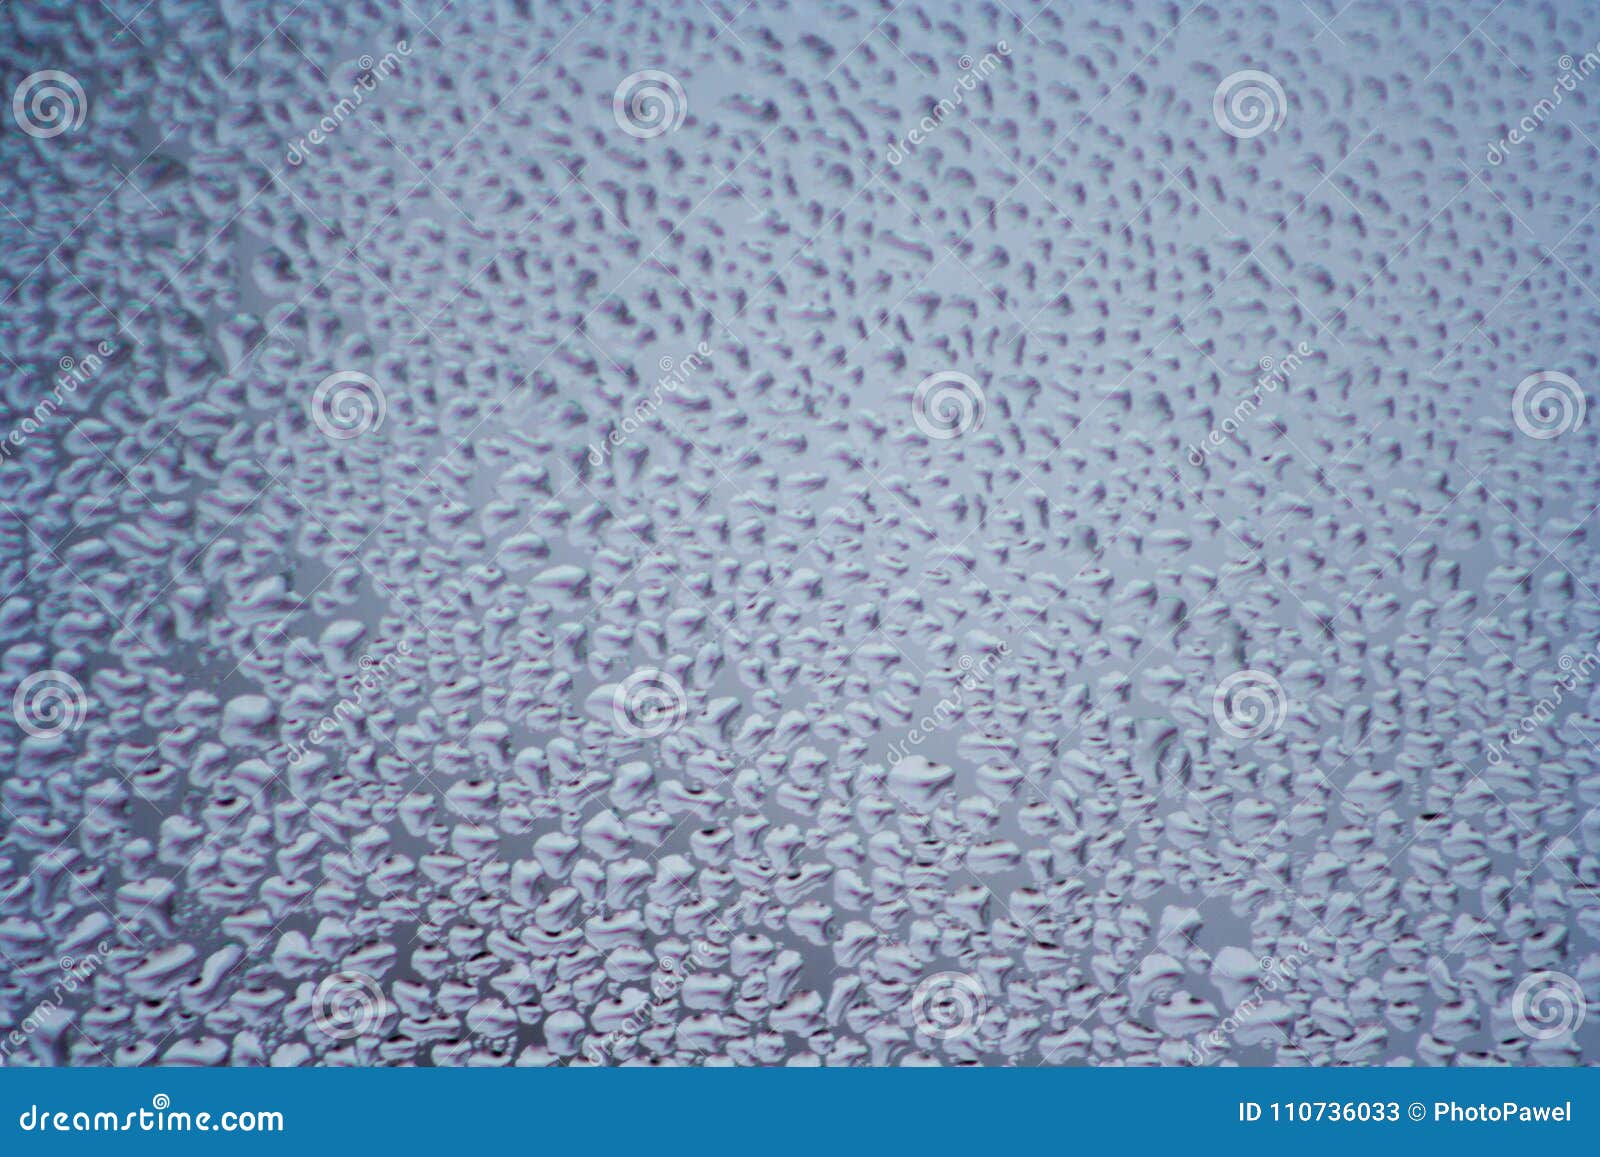 Background with Water Drops on the Glass. Water Vapor on the Win Stock ...